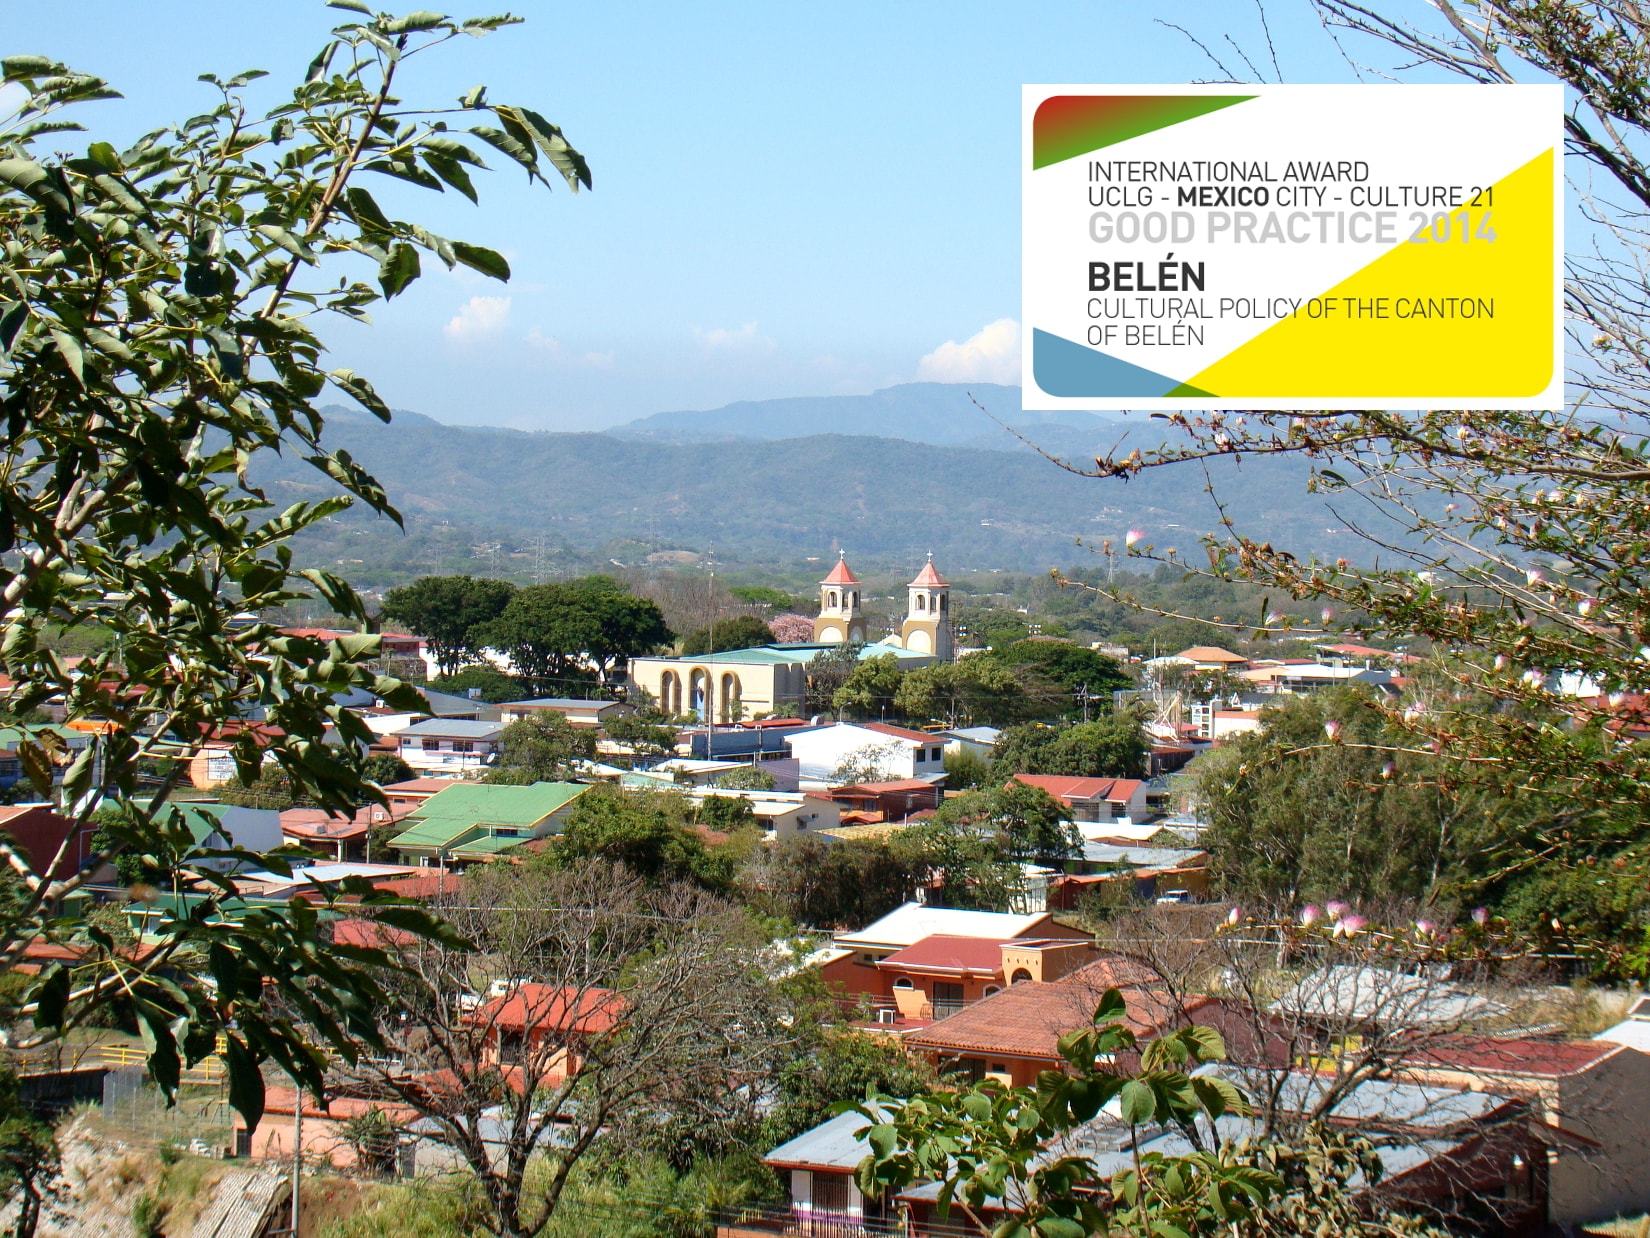 Cultural policy of the canton of Belén